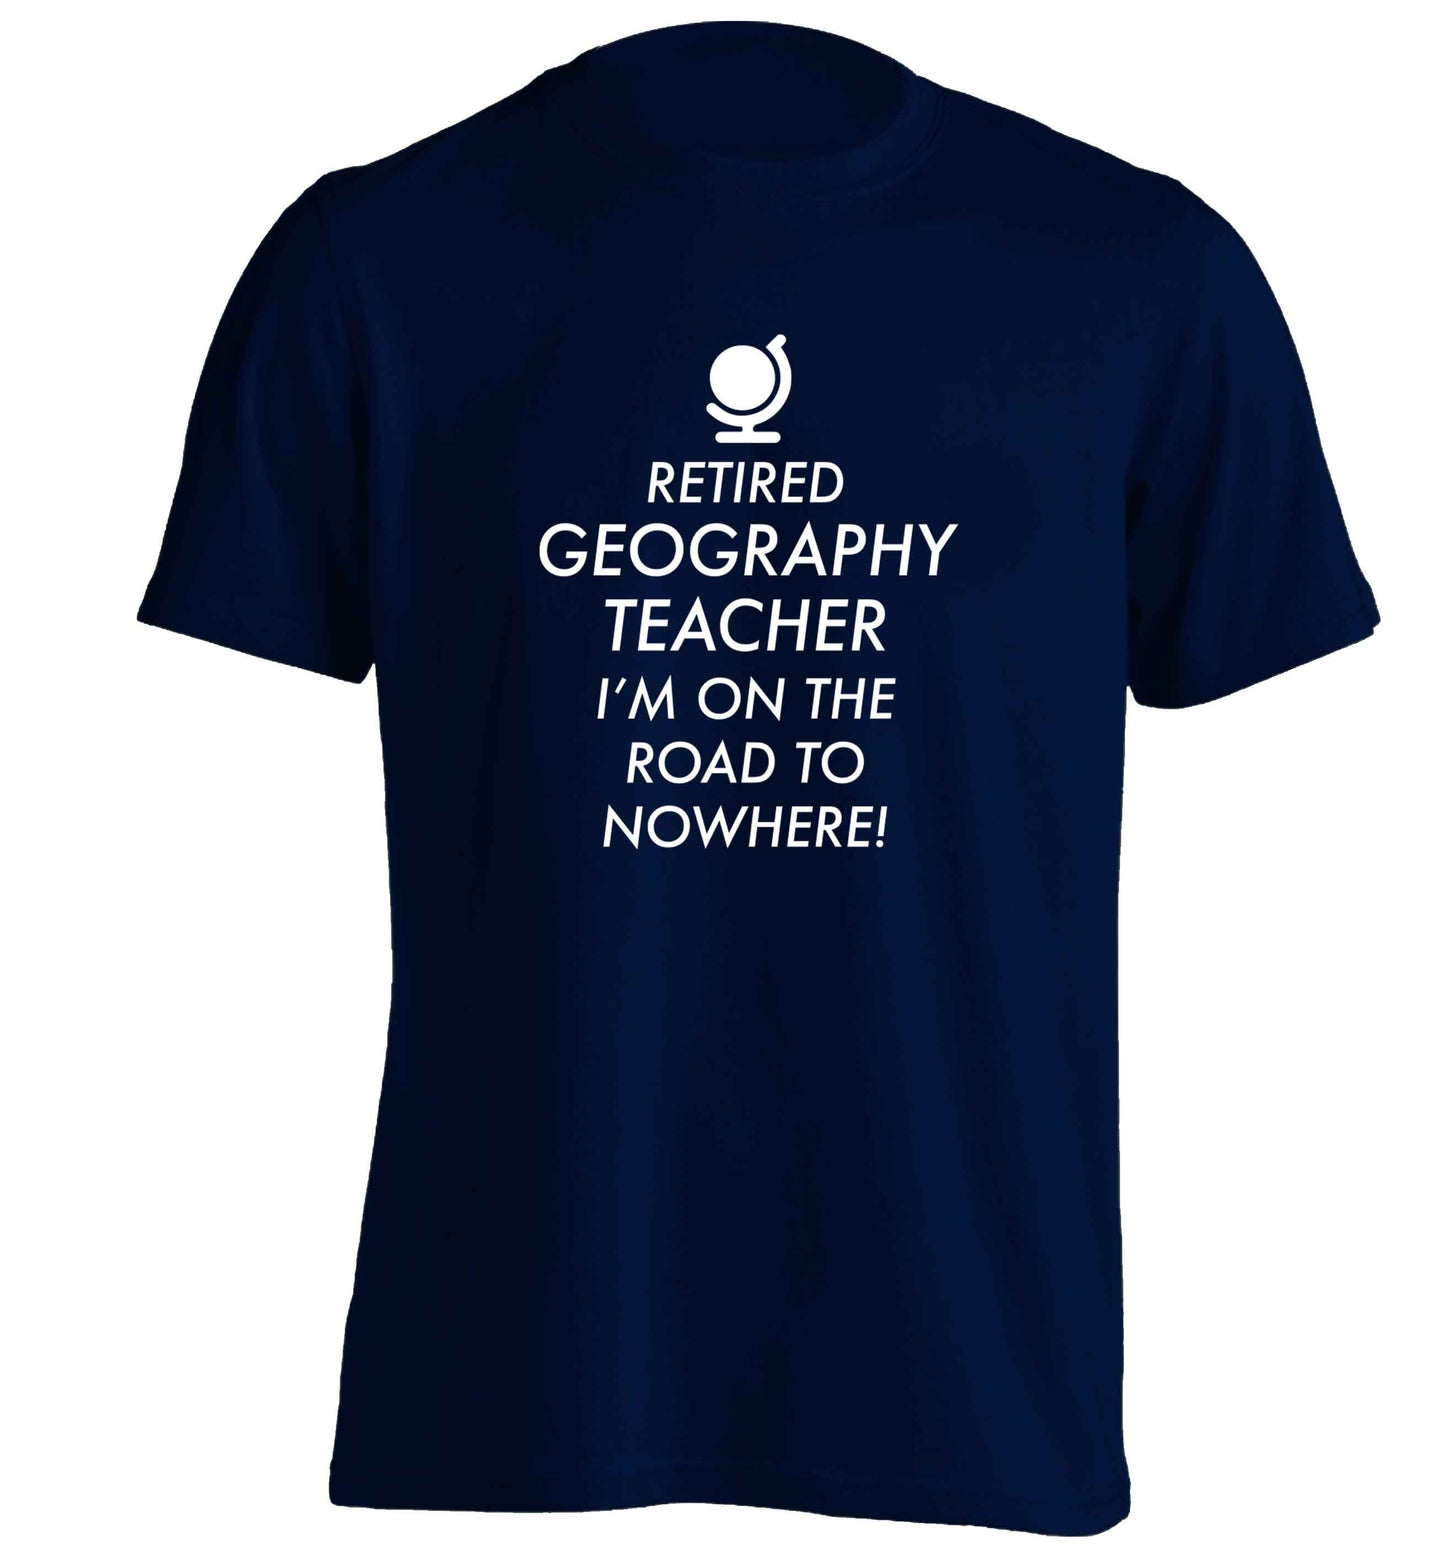 Retired geography teacher I'm on the road to nowhere adults unisex navy Tshirt 2XL